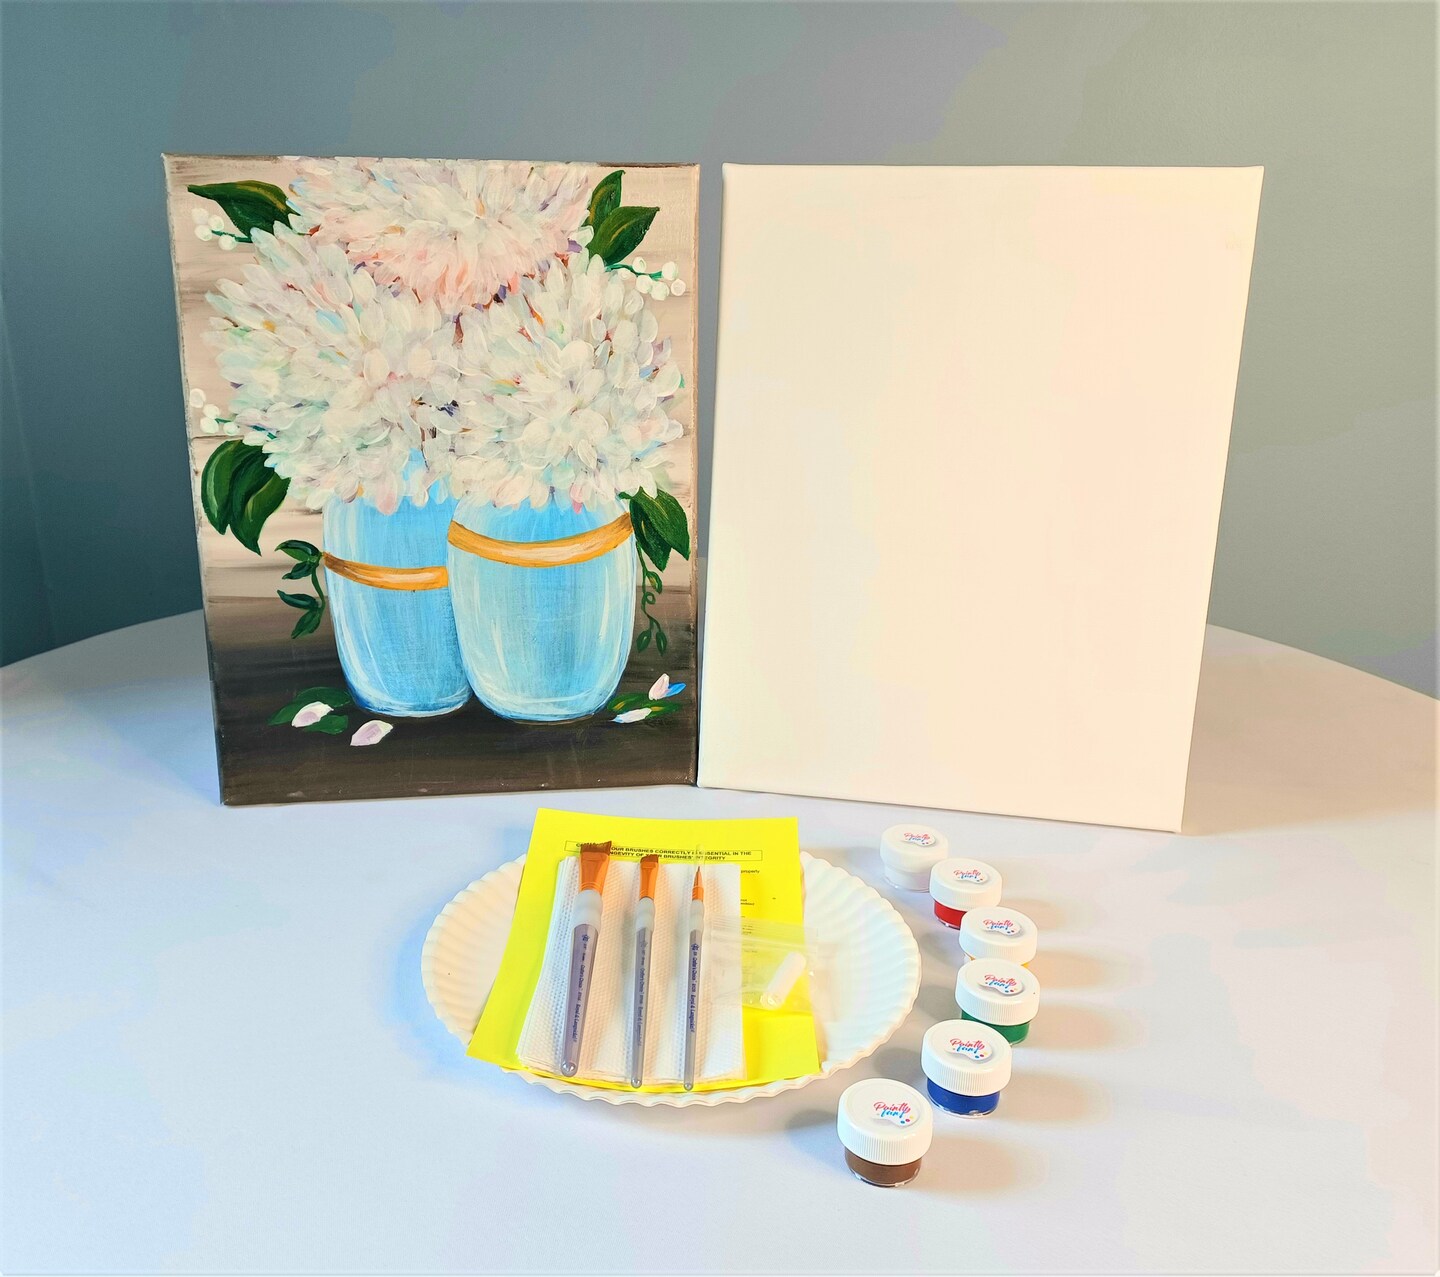 Incraftables Canvas Paint Set. Acrylic Painting Kit w/ White Canvas, Brush, Acrylic Colors and Palette, Size: 12 x 12